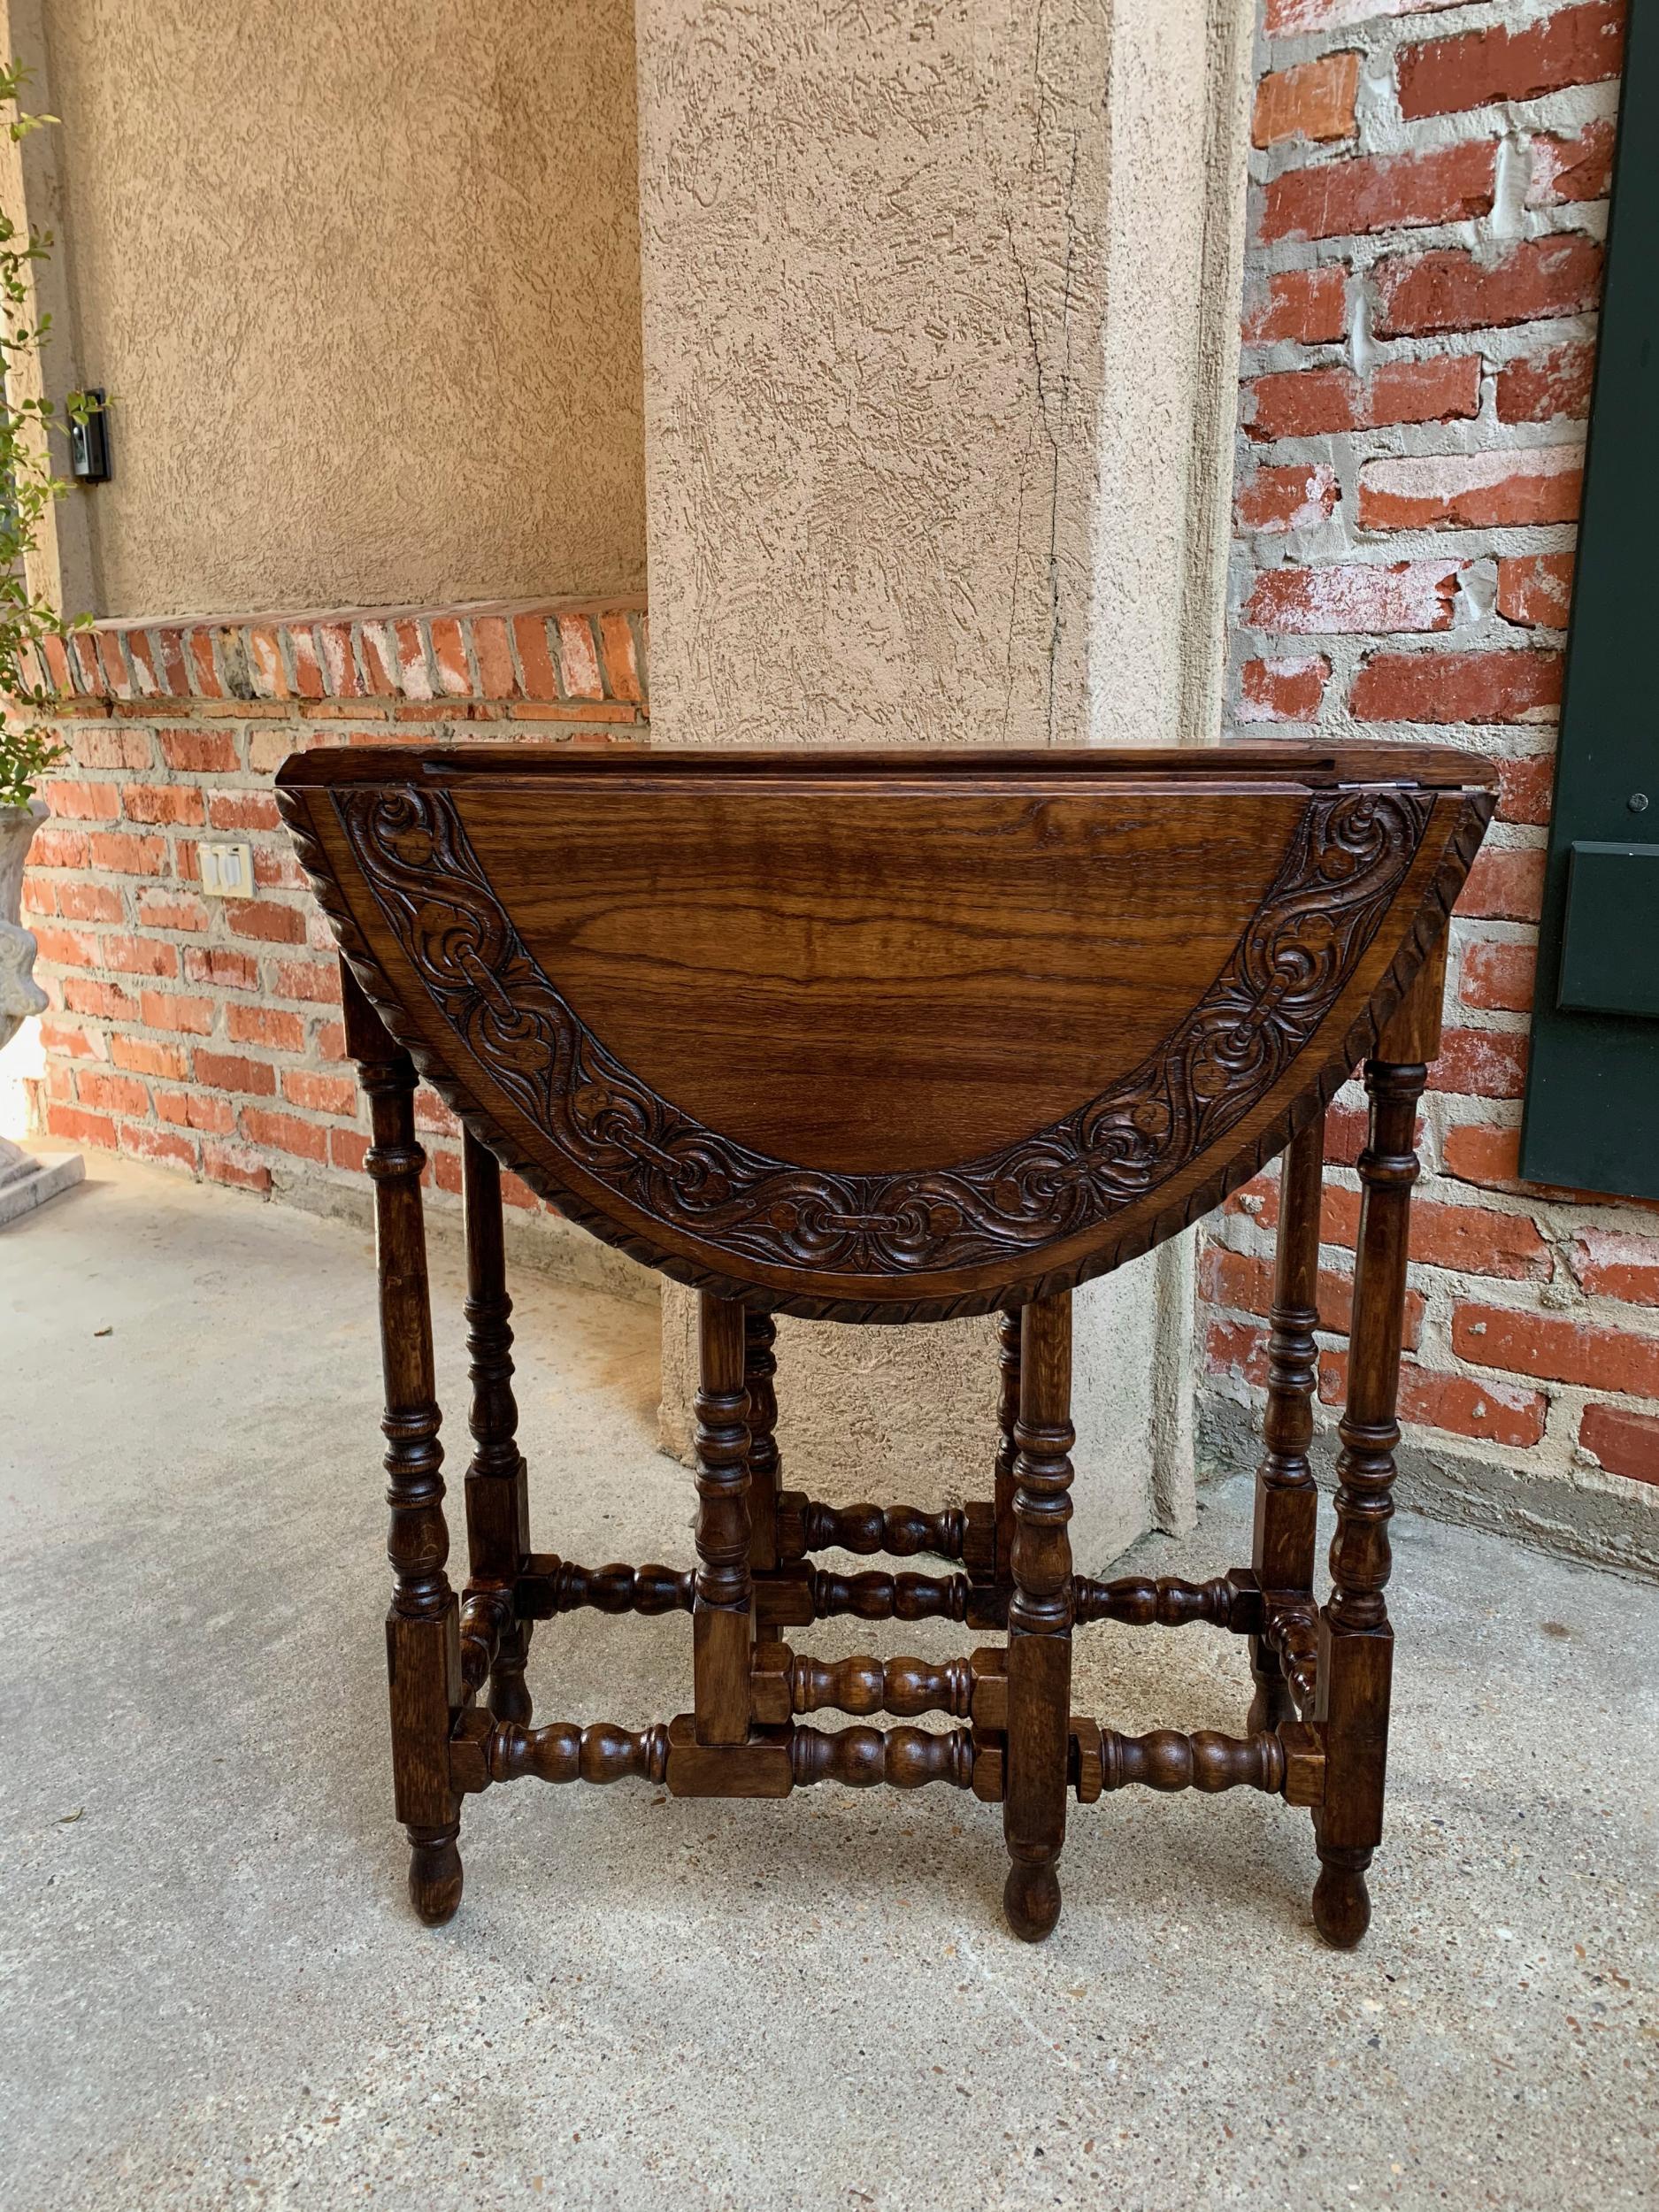 Petite antique English oak side sofa wine table drop-leaf gate leg carved oval
 
~Direct from England~
~A beautiful antique English oak gate leg, drop-leaf table. It is a very petite size, which is the smallest size drop leaf table available (and